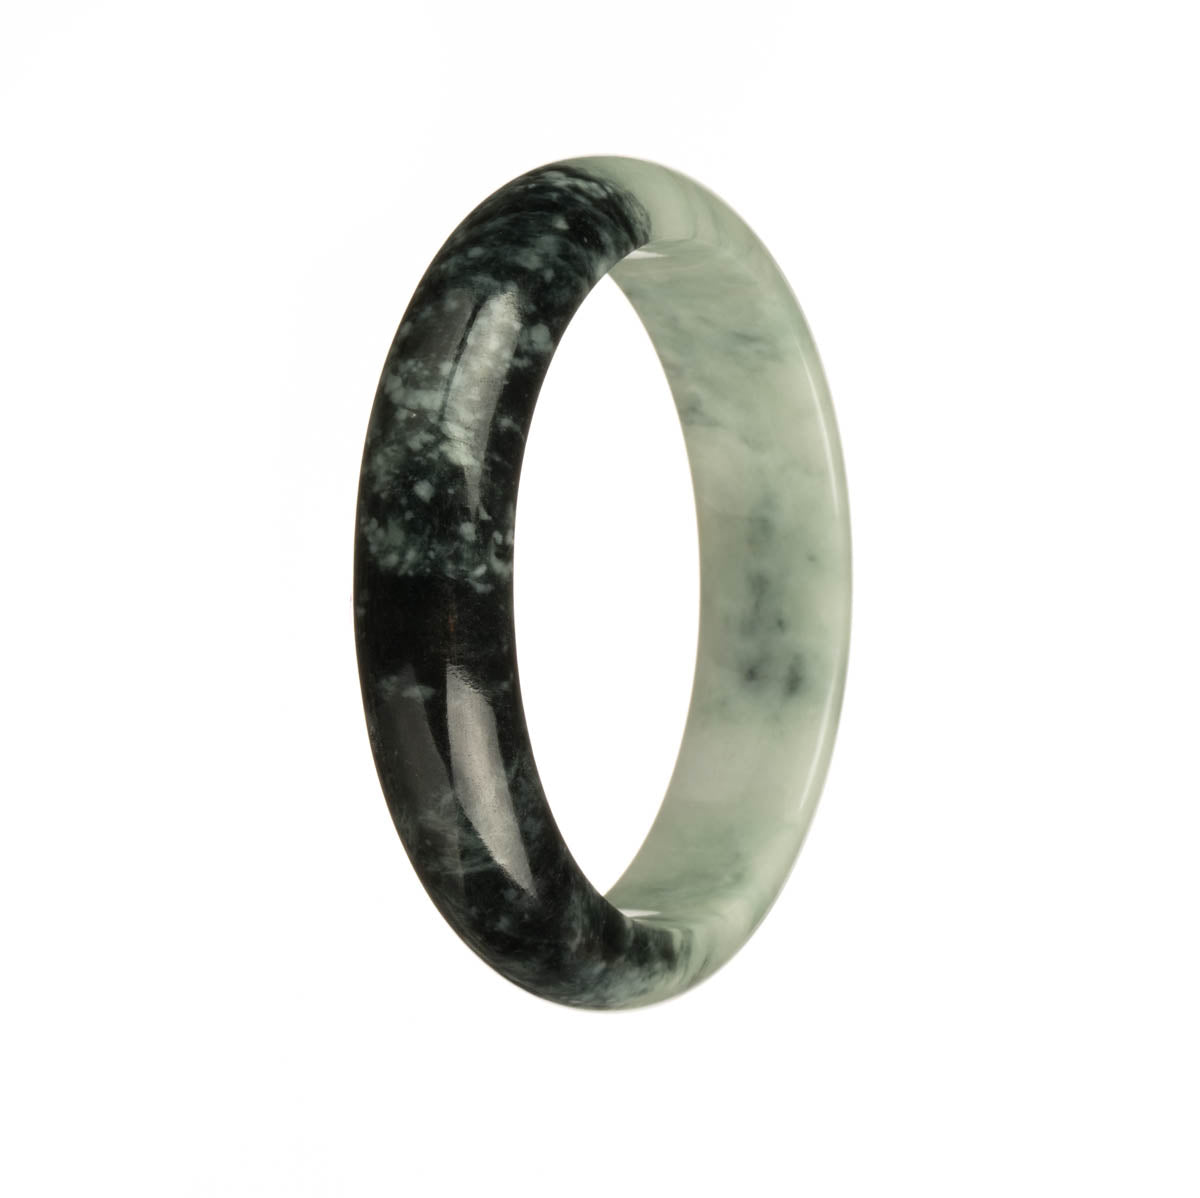 A close-up of a traditional jade bangle with a deep, dark green color and intricate patterns. The bangle is in a half-moon shape and measures 55mm in diameter.